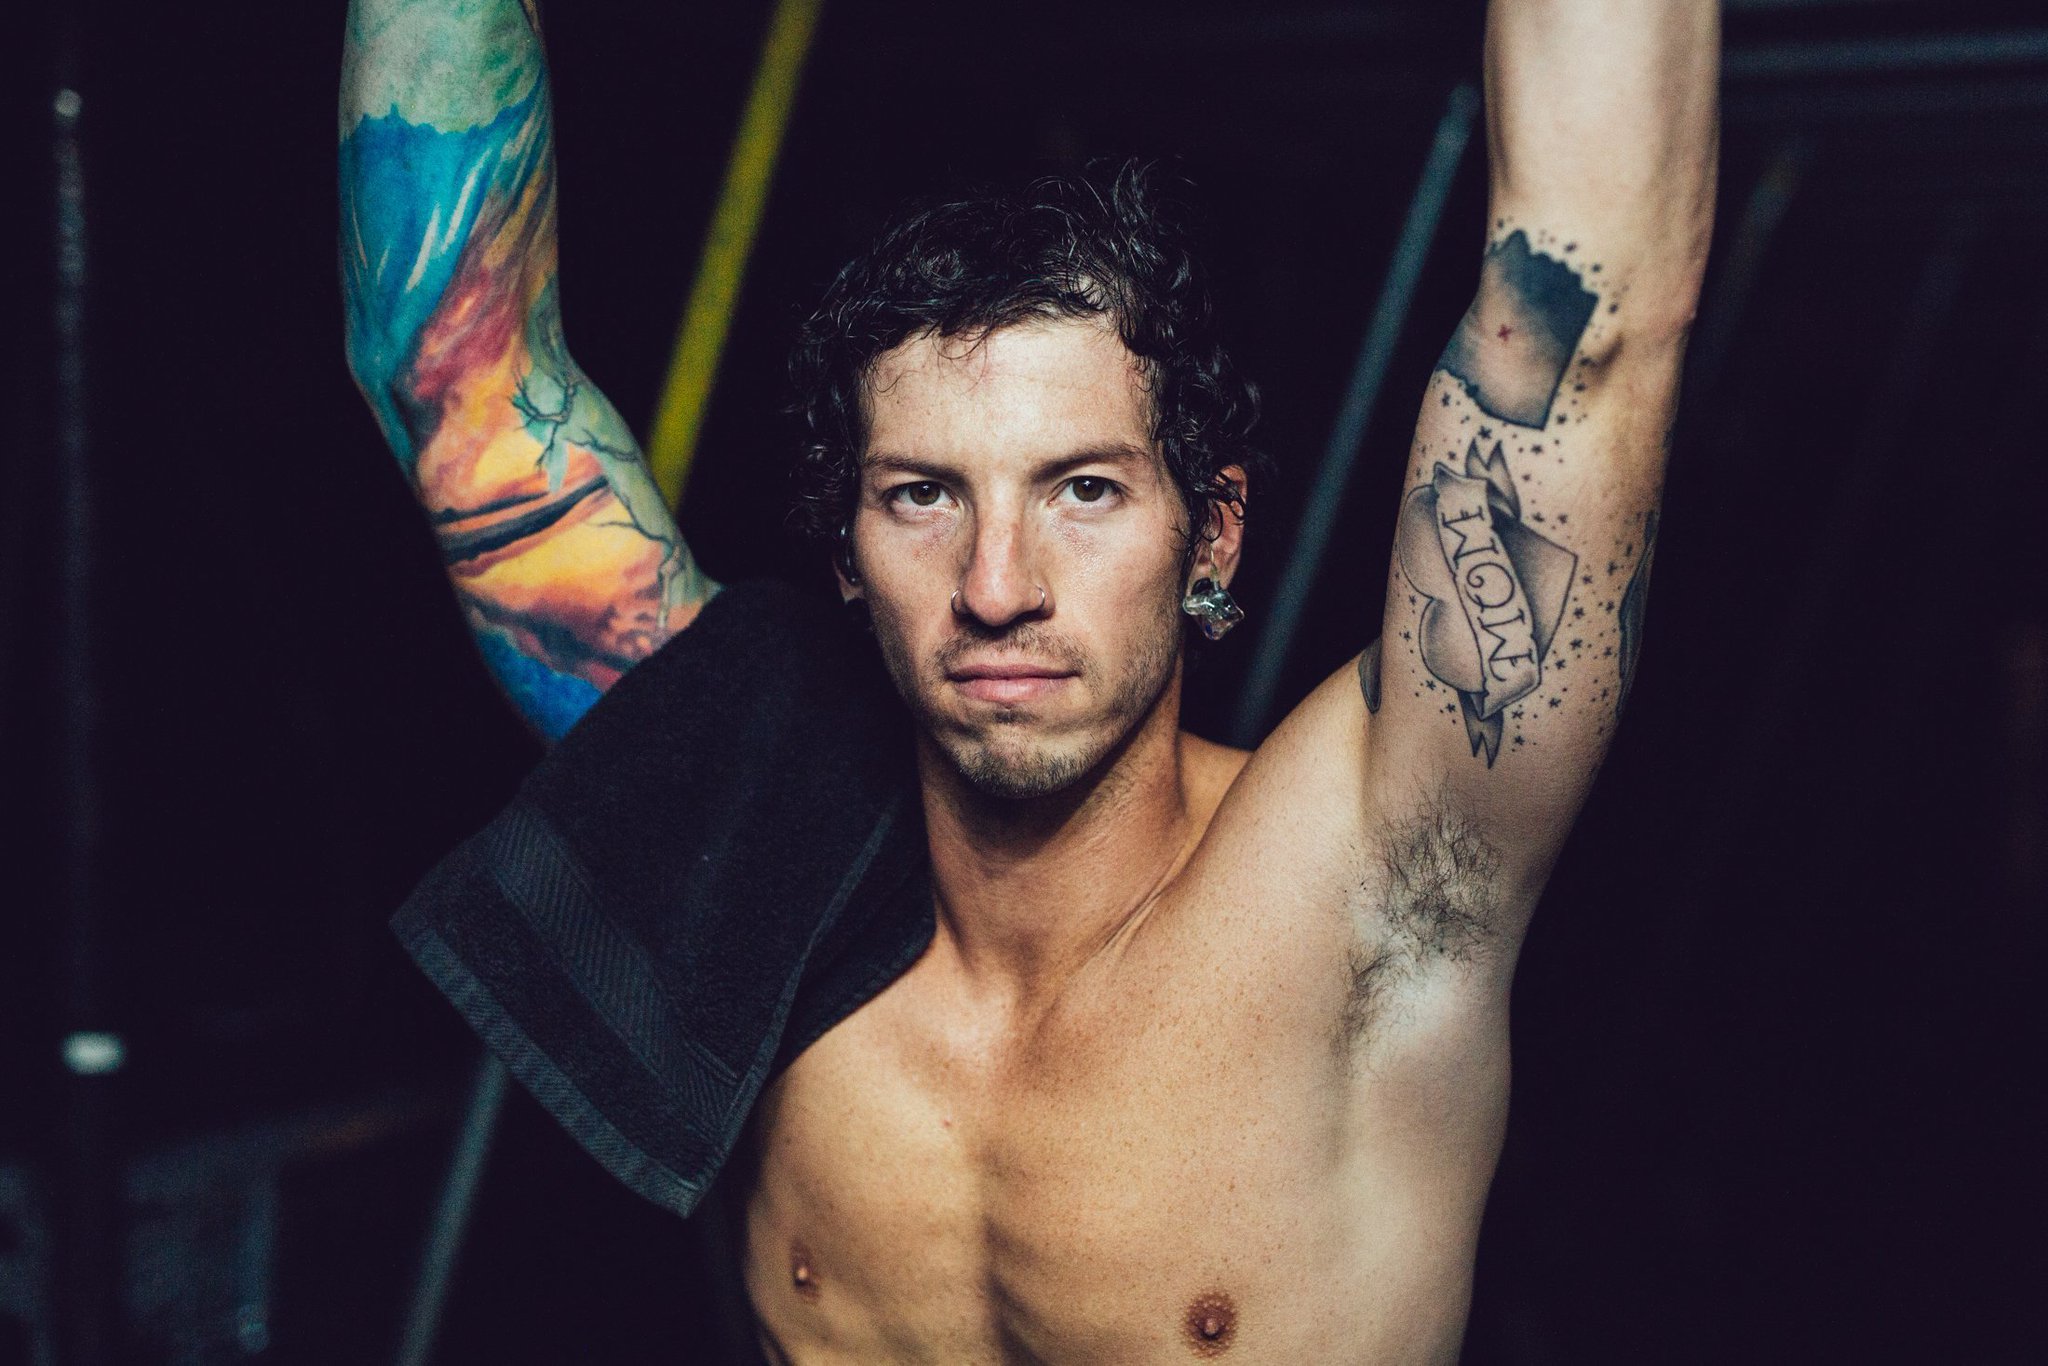 Happy birthday to the one and only, the drummer that drums his heart away- josh dun. 